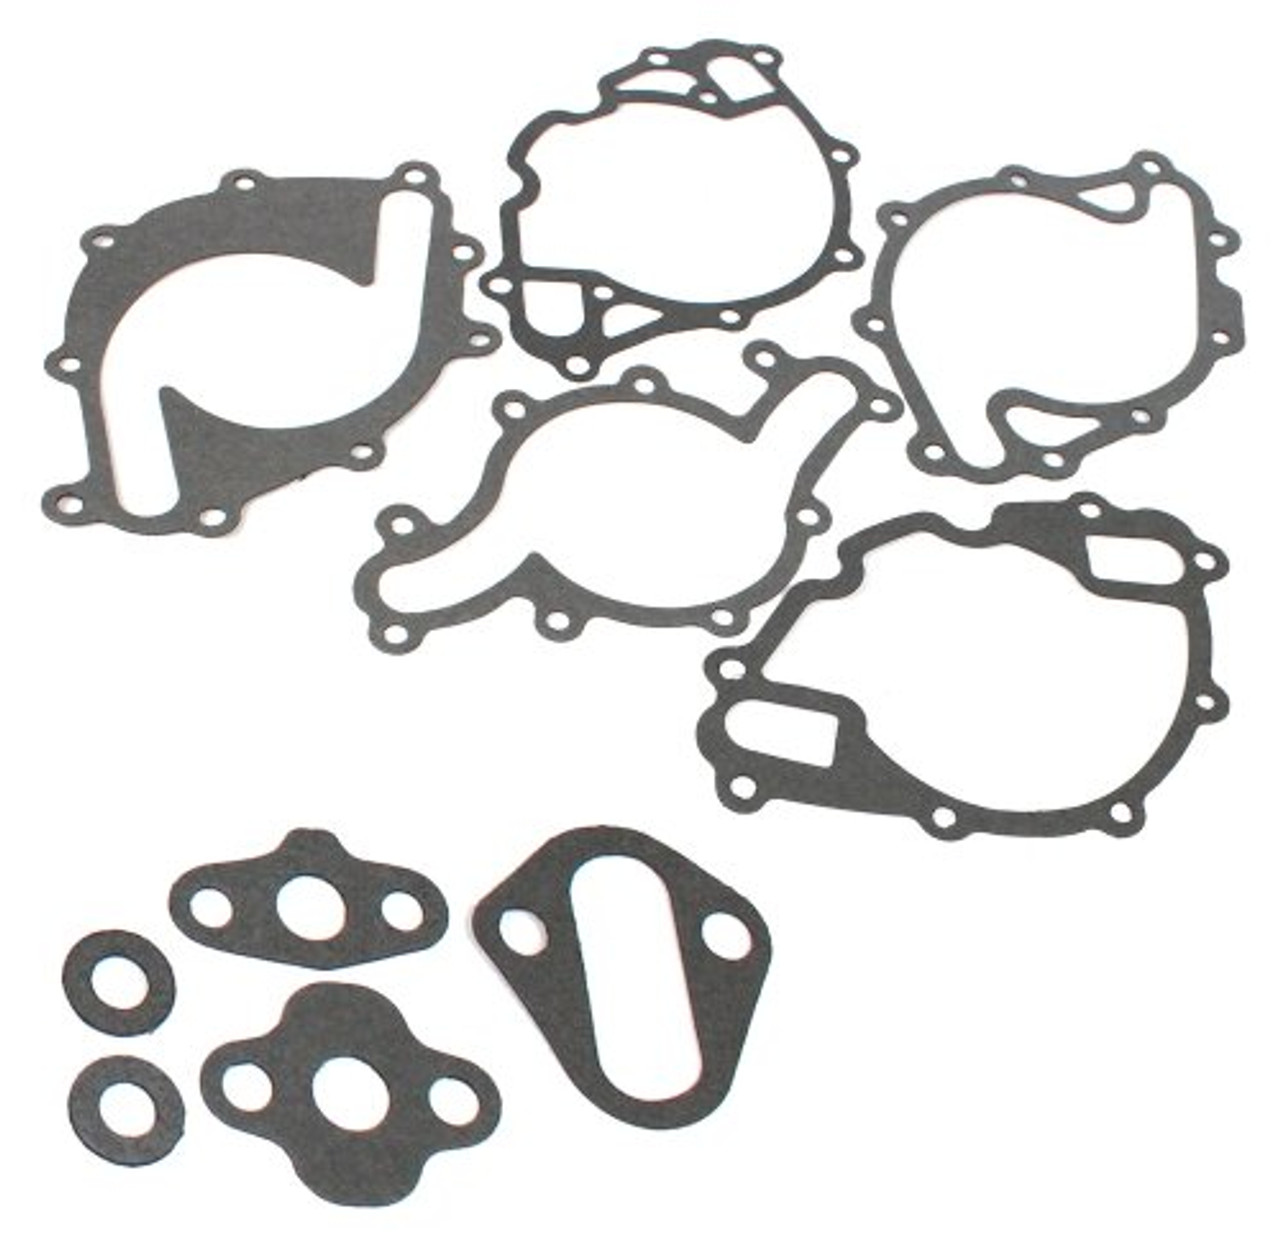 Lower Gasket Set - 1985 Ford Thunderbird 5.0L Engine Parts # LGS4112ZE33